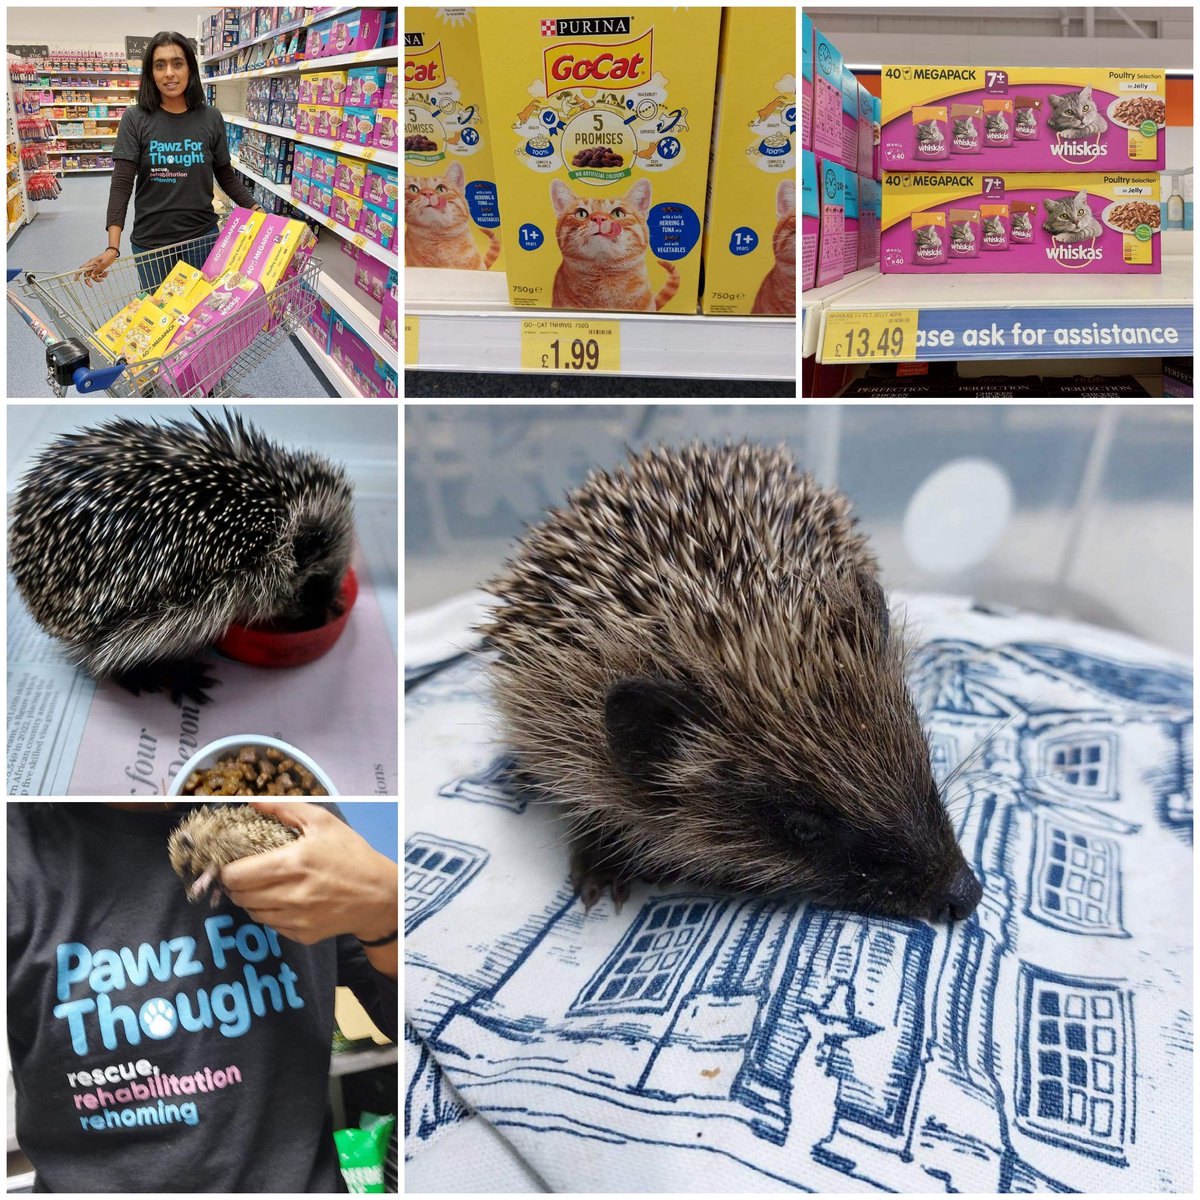 Today with our friend Vijay we supported @Pawzforthought as part of our #Hogtober campaign.  Please donate if you can below 👇 lnkd.in/epfYr_VH
#helpthehedgehogs #supportlocal #wildlifewednesday #hedgehogs #supportlocalnature #climateactionnorth #charitysupport